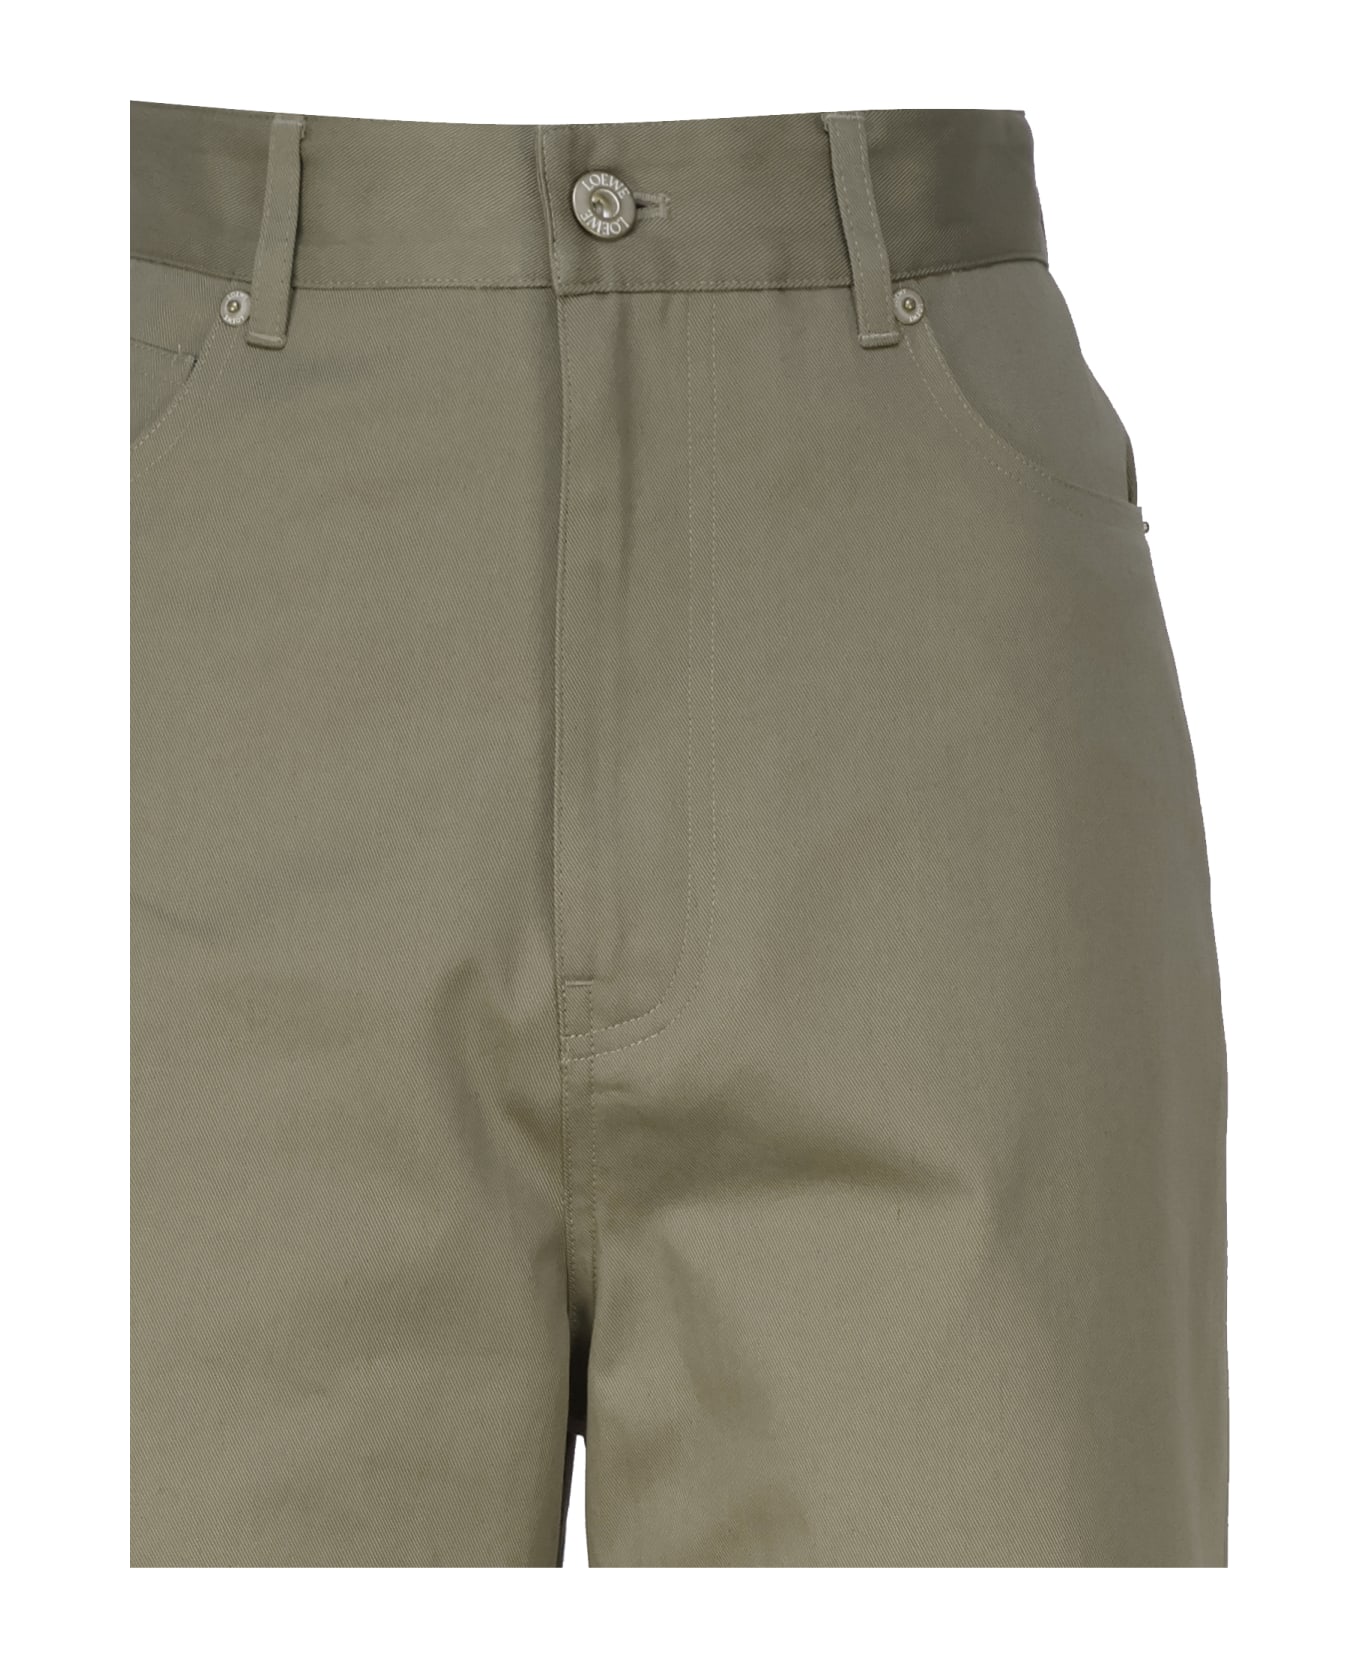 Loewe Logo Patch High-waisted Trousers - Military green